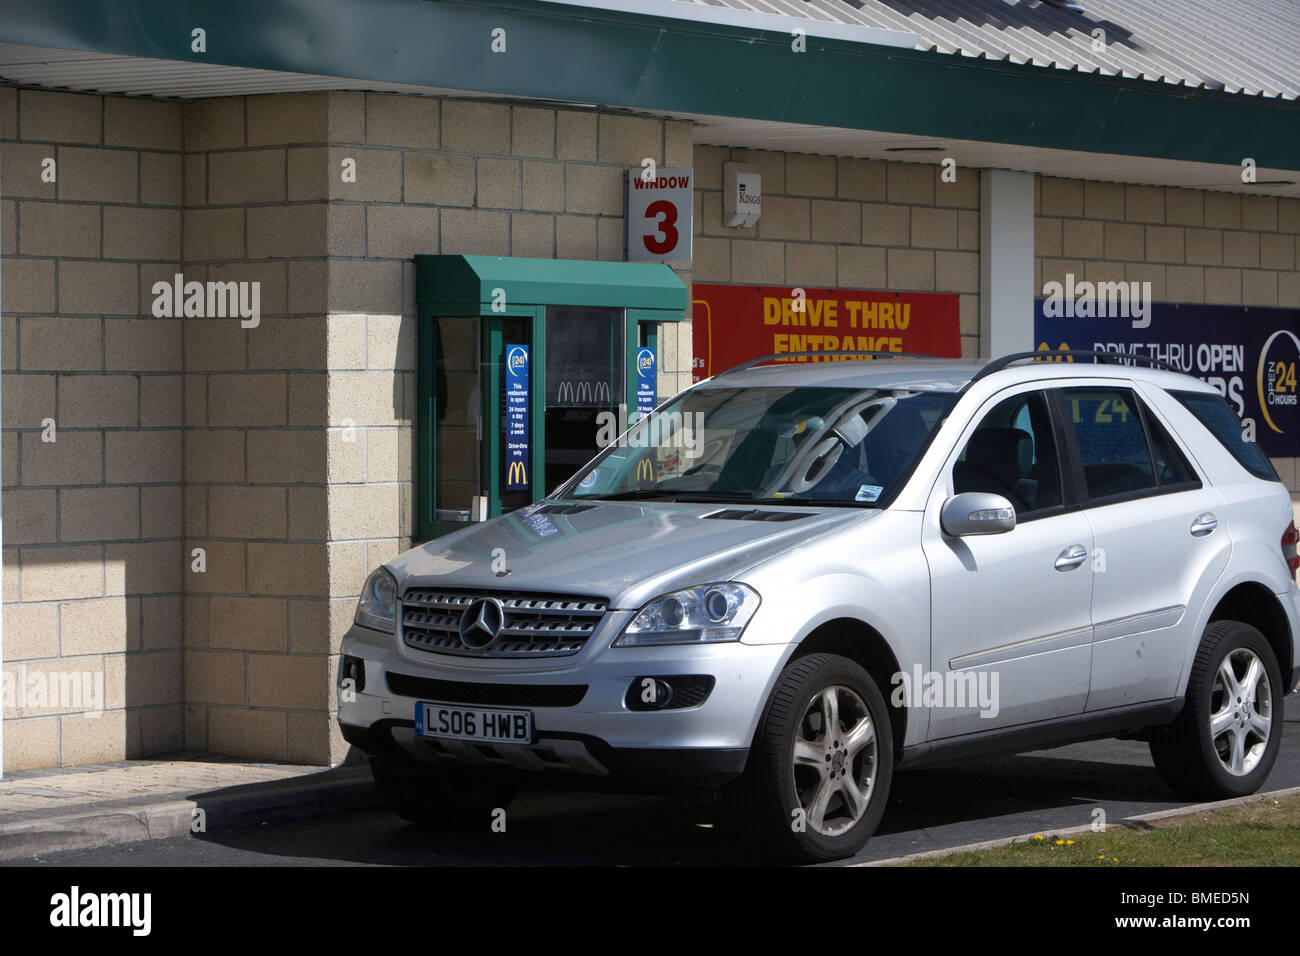 mercedes suv at the window of a mcdonalds drive through fast food restaurant merseyside england uk Stock Photo